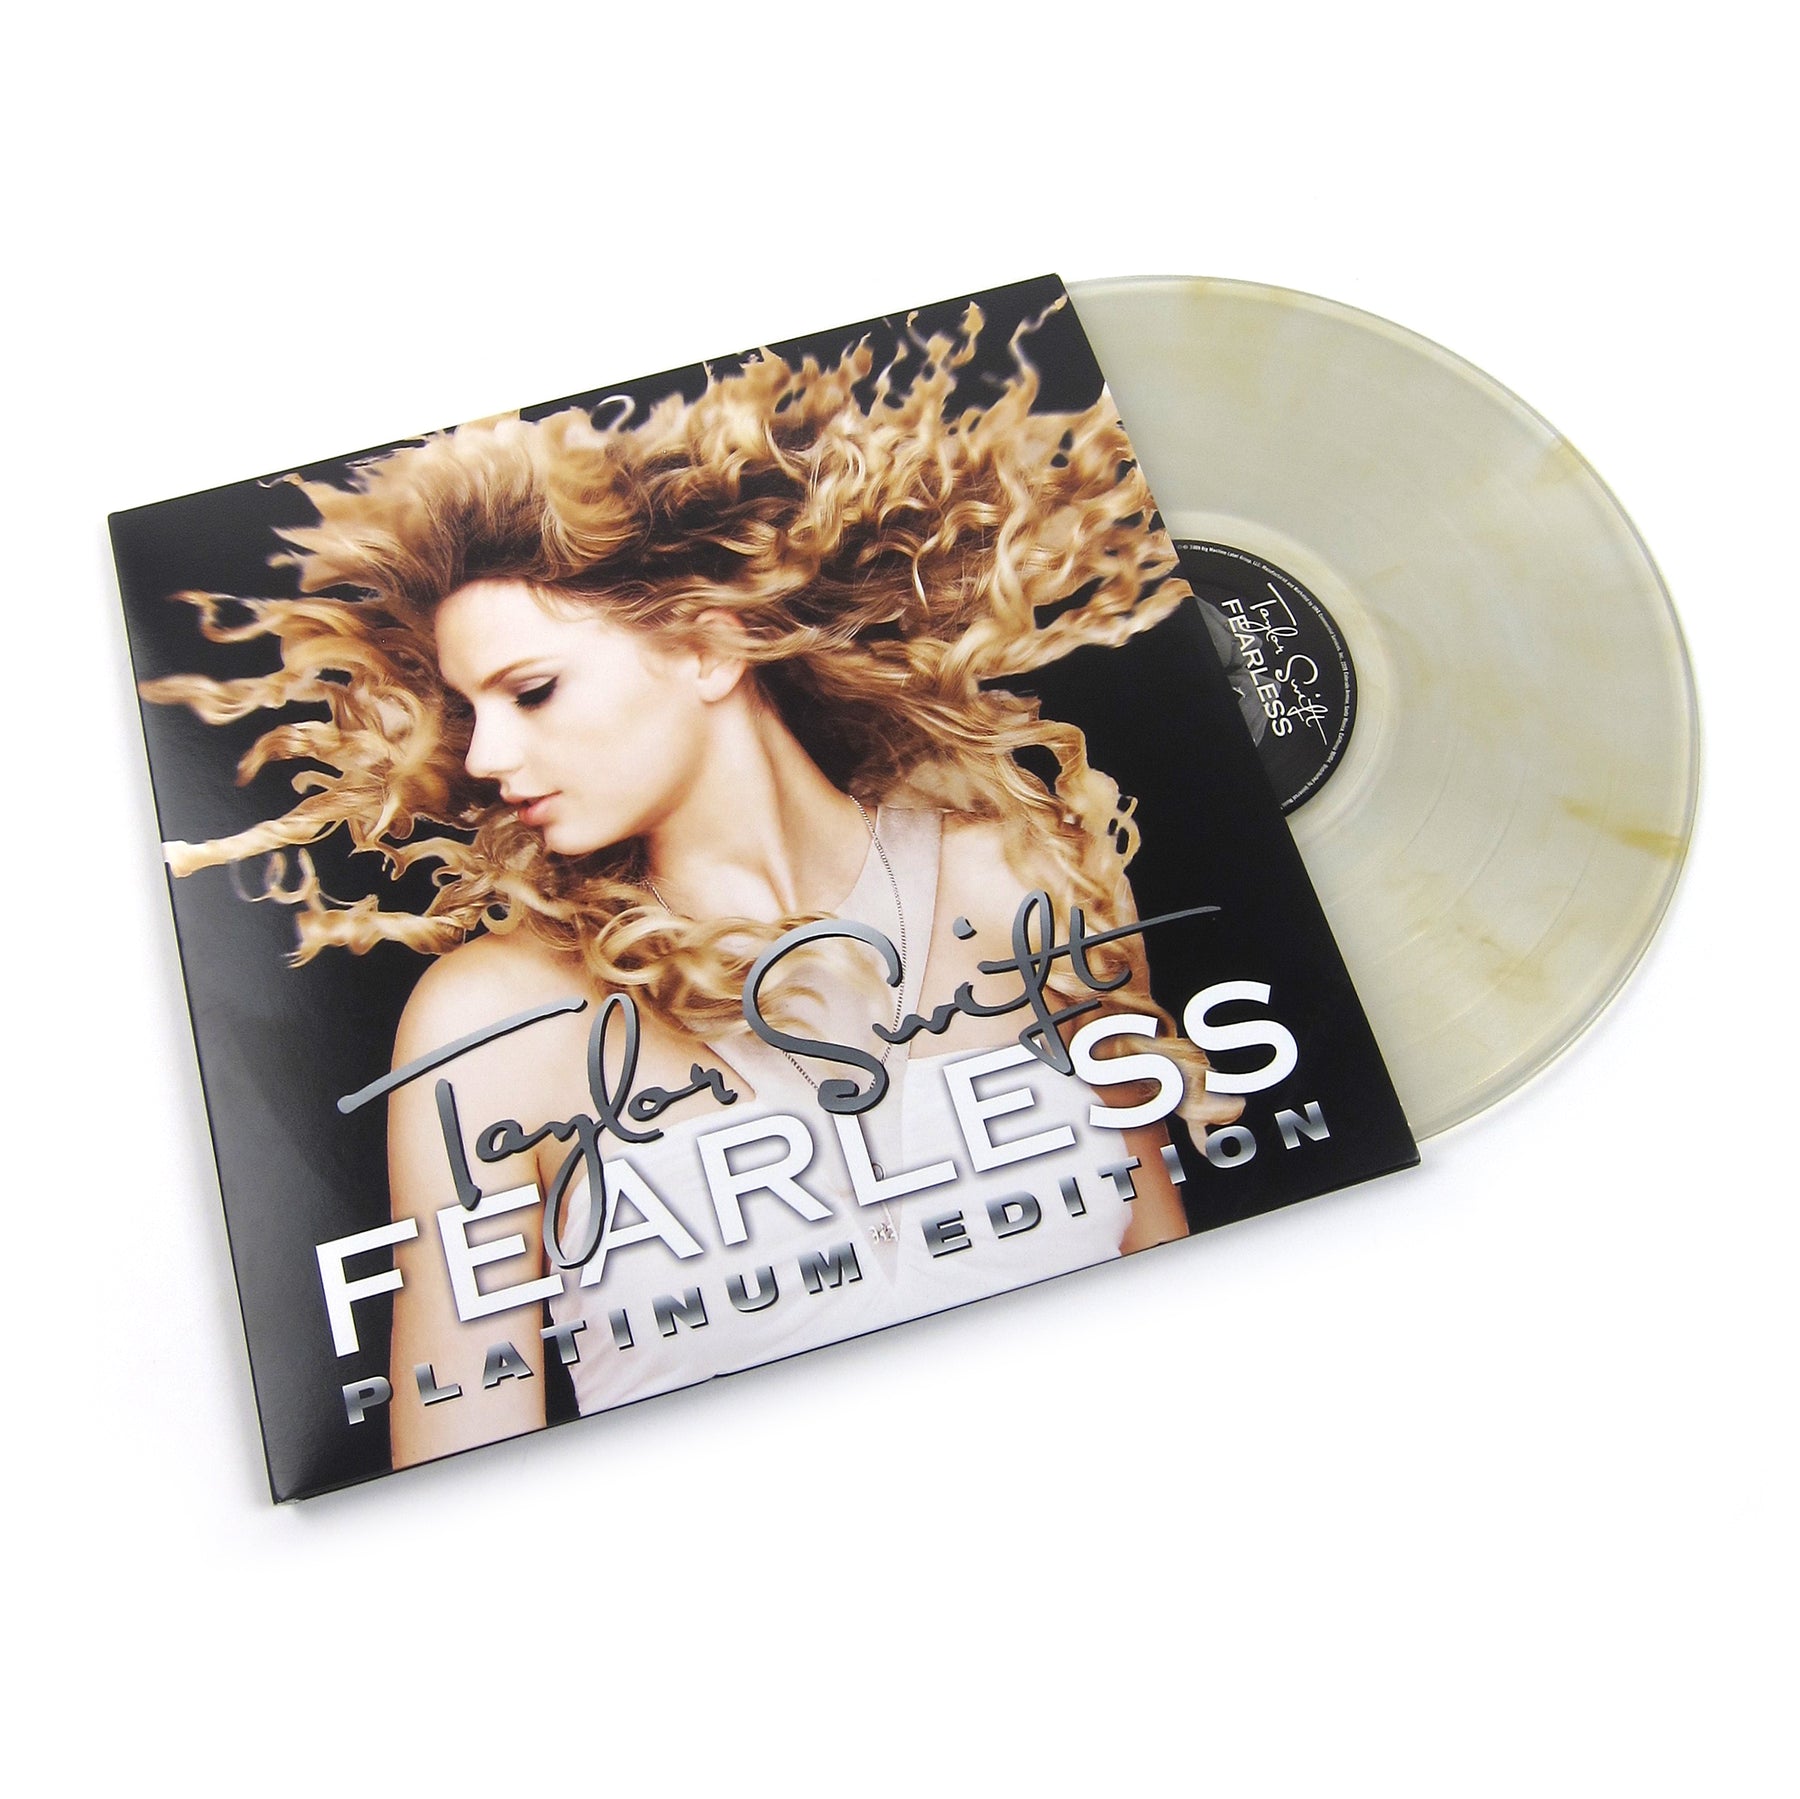 Taylor Swift Fearless Platinum Edition Colored Vinyl Vinyl Lp Record Store Day